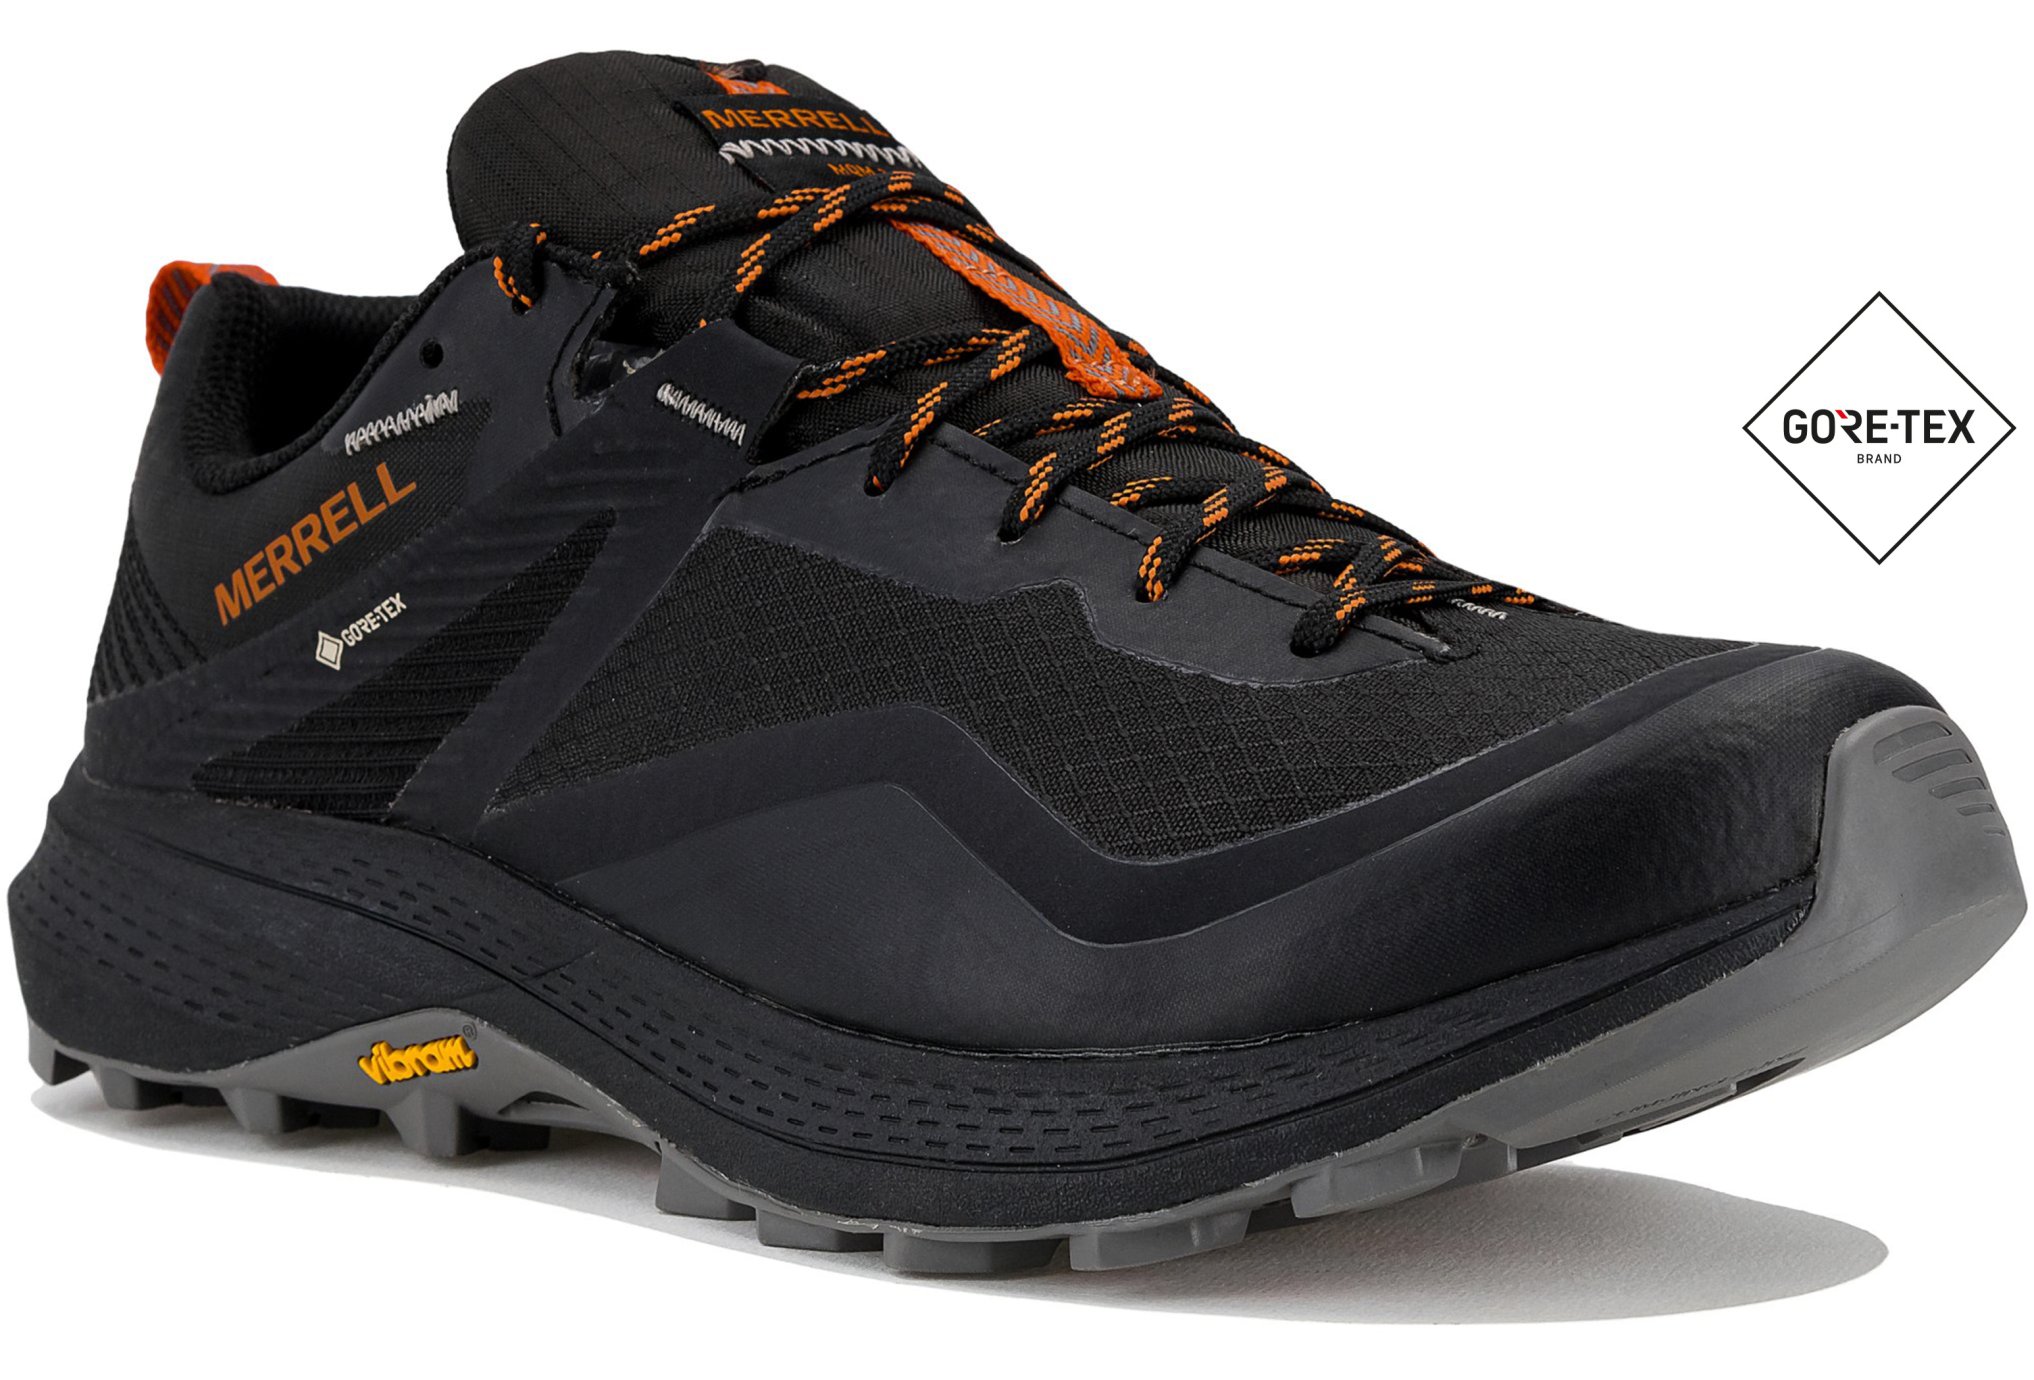 Merrell MQM 3 Gore-Tex M Chaussures homme